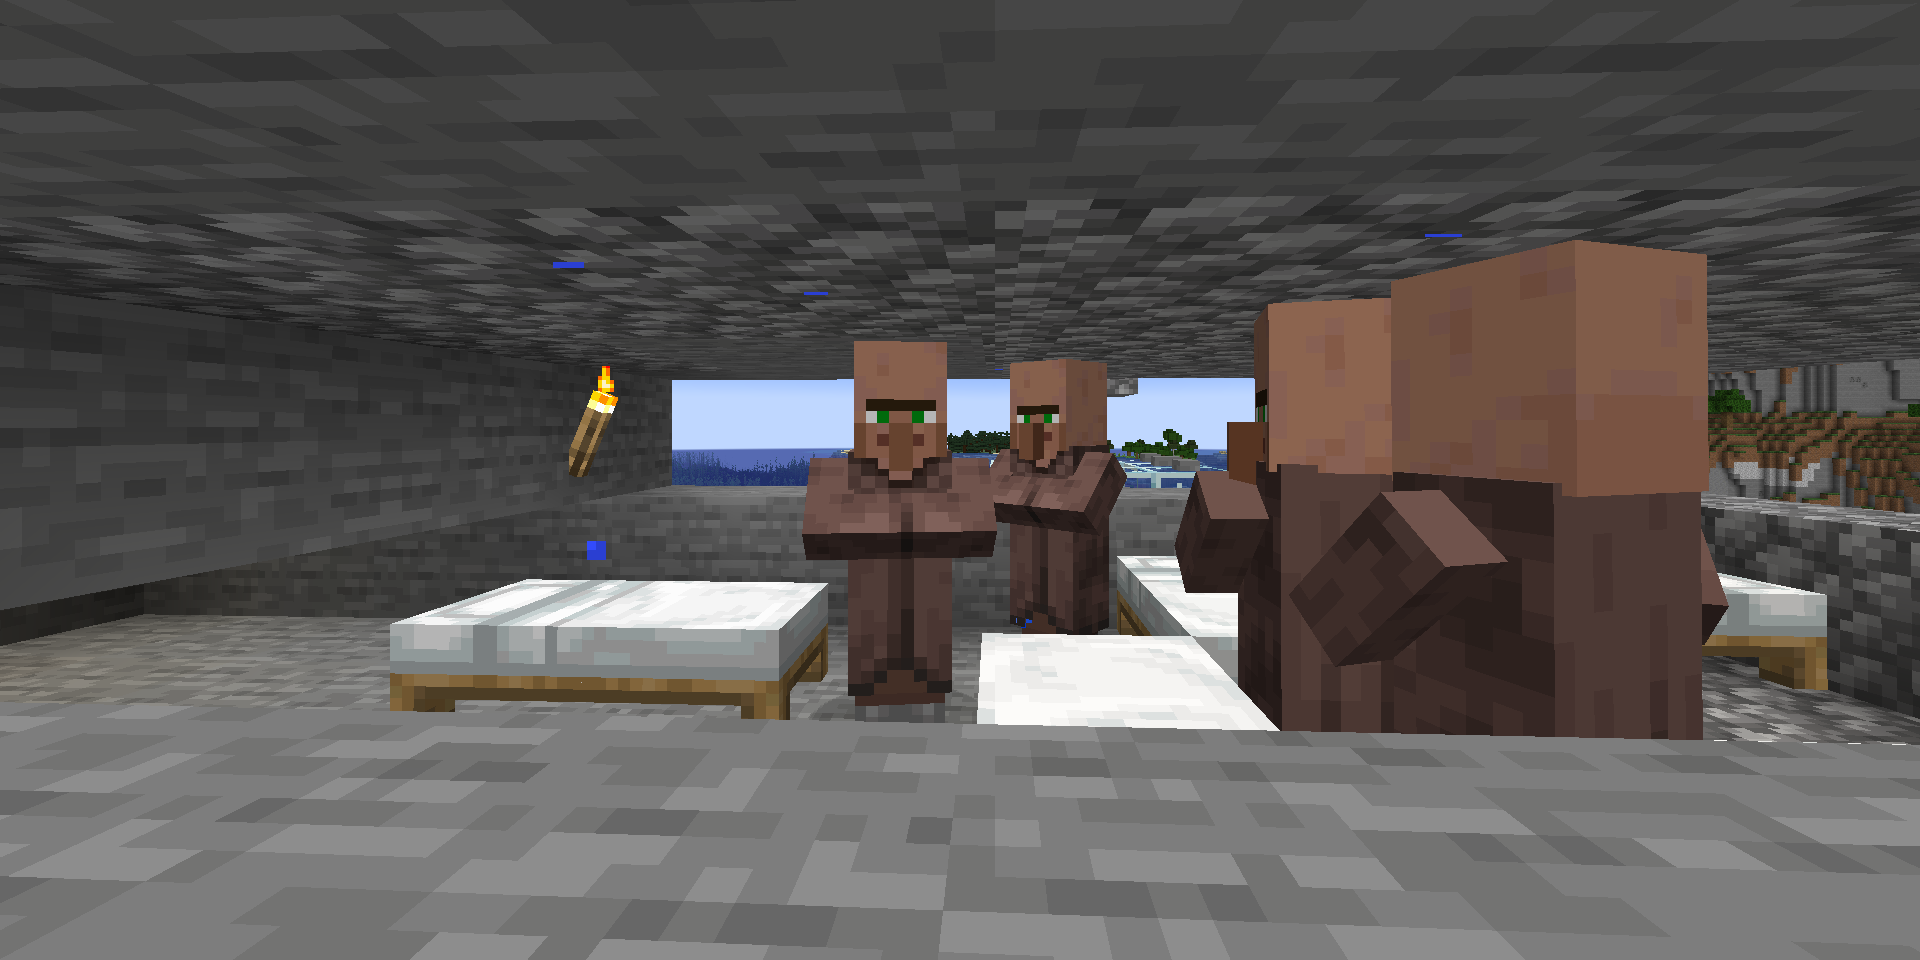 Minecraft villagers trapped in a stone box with beds